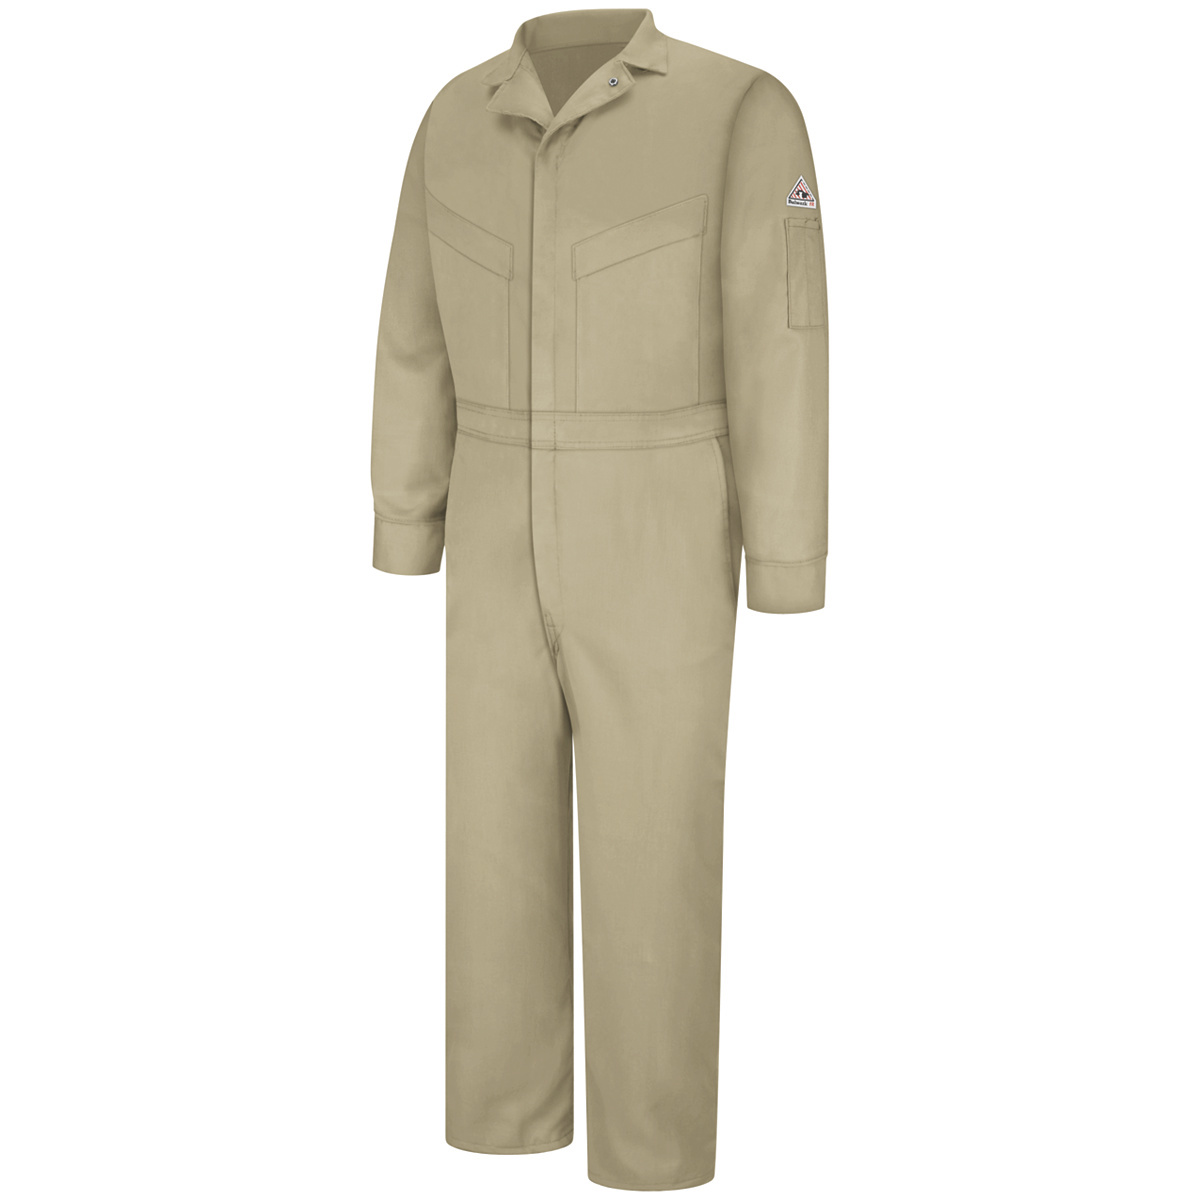 Bulwark® 38 Regular Khaki EXCEL FR® ComforTouch® Sateen/Cotton/Nylon Water Repellent Flame Resistant Coveralls With Zipper Front